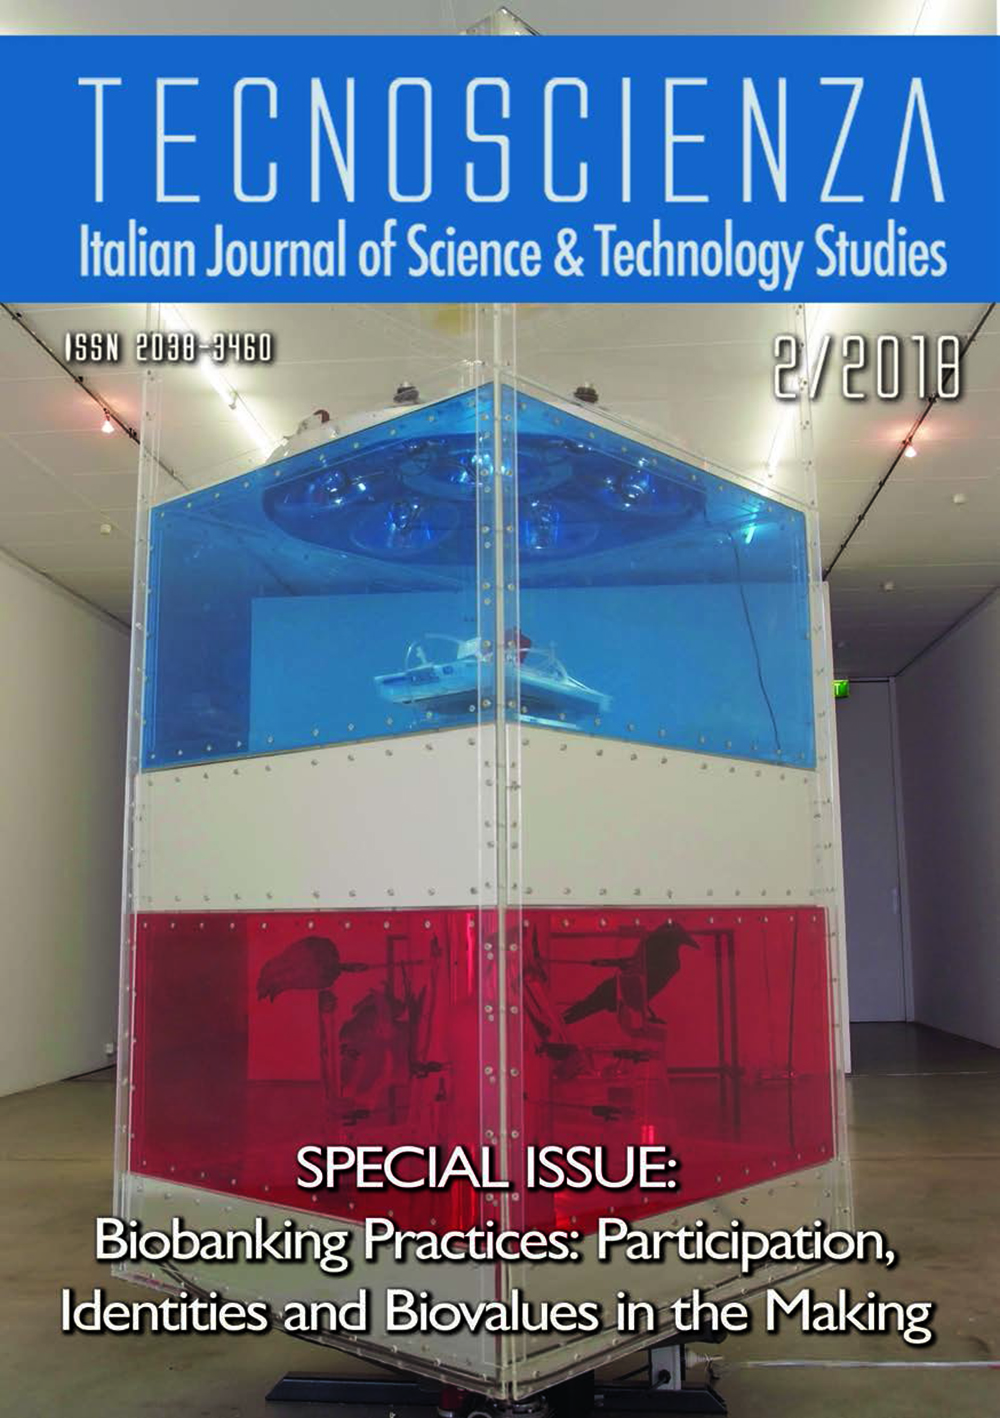 "NoArk" by The Tissue Culture & Art Project (Oron Catts and Ionat Zurr). Cover of Tecnoscienza number 18 (2nd Issue, Year 2018)